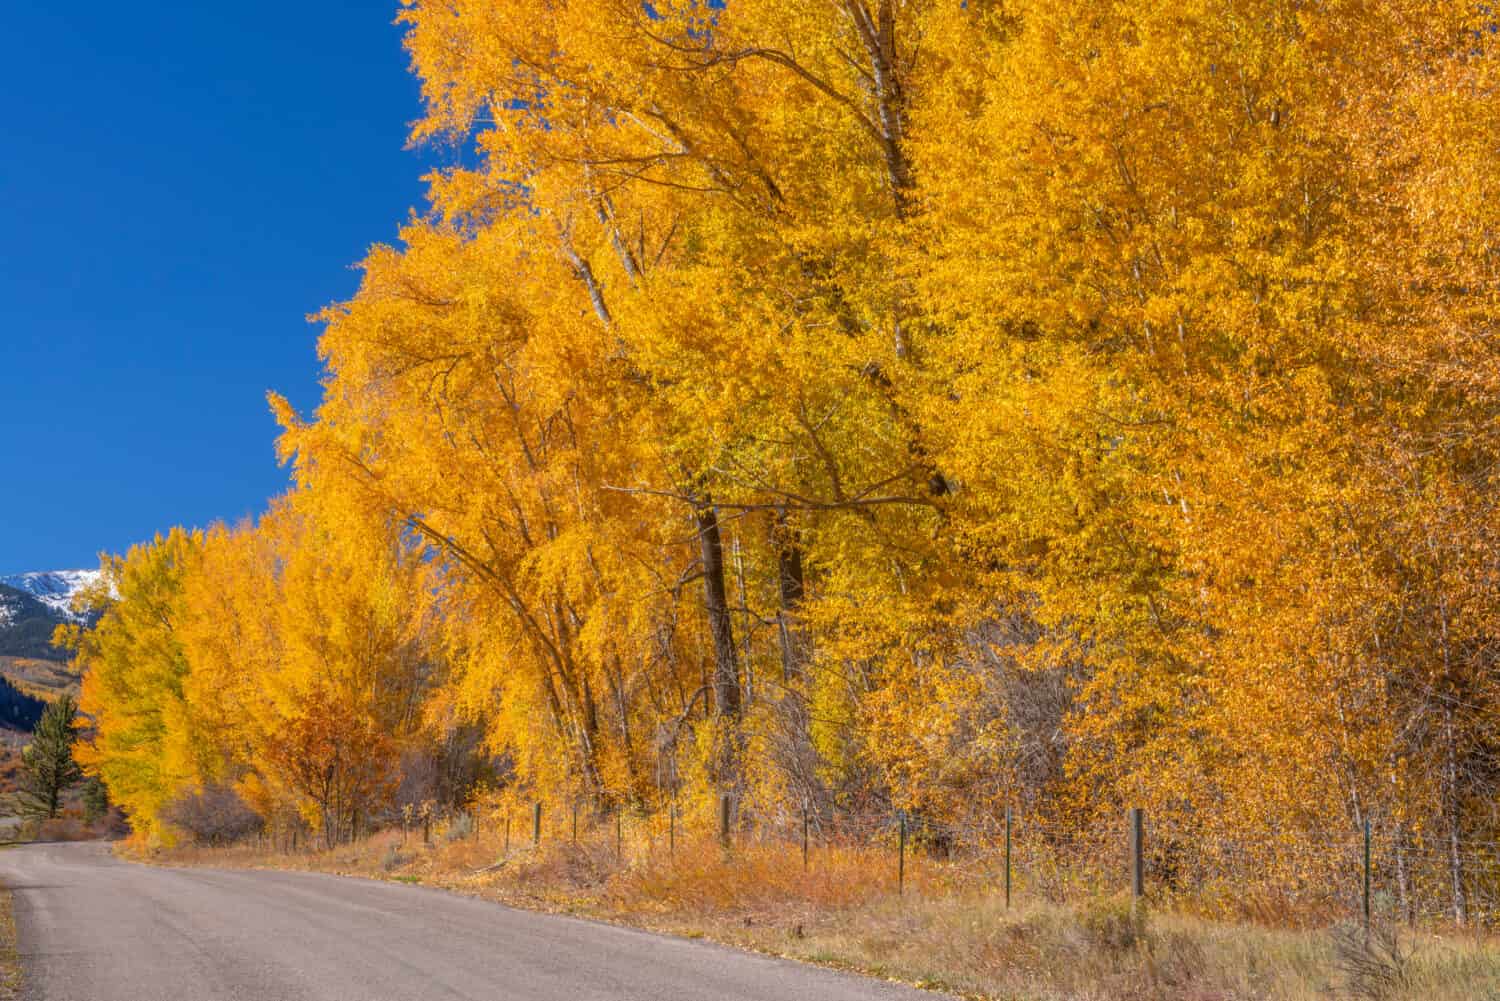 USA, Colorado. White River National Forest, Narrowleaf cottonwood with autumn foliage along Capitol Creek Road.